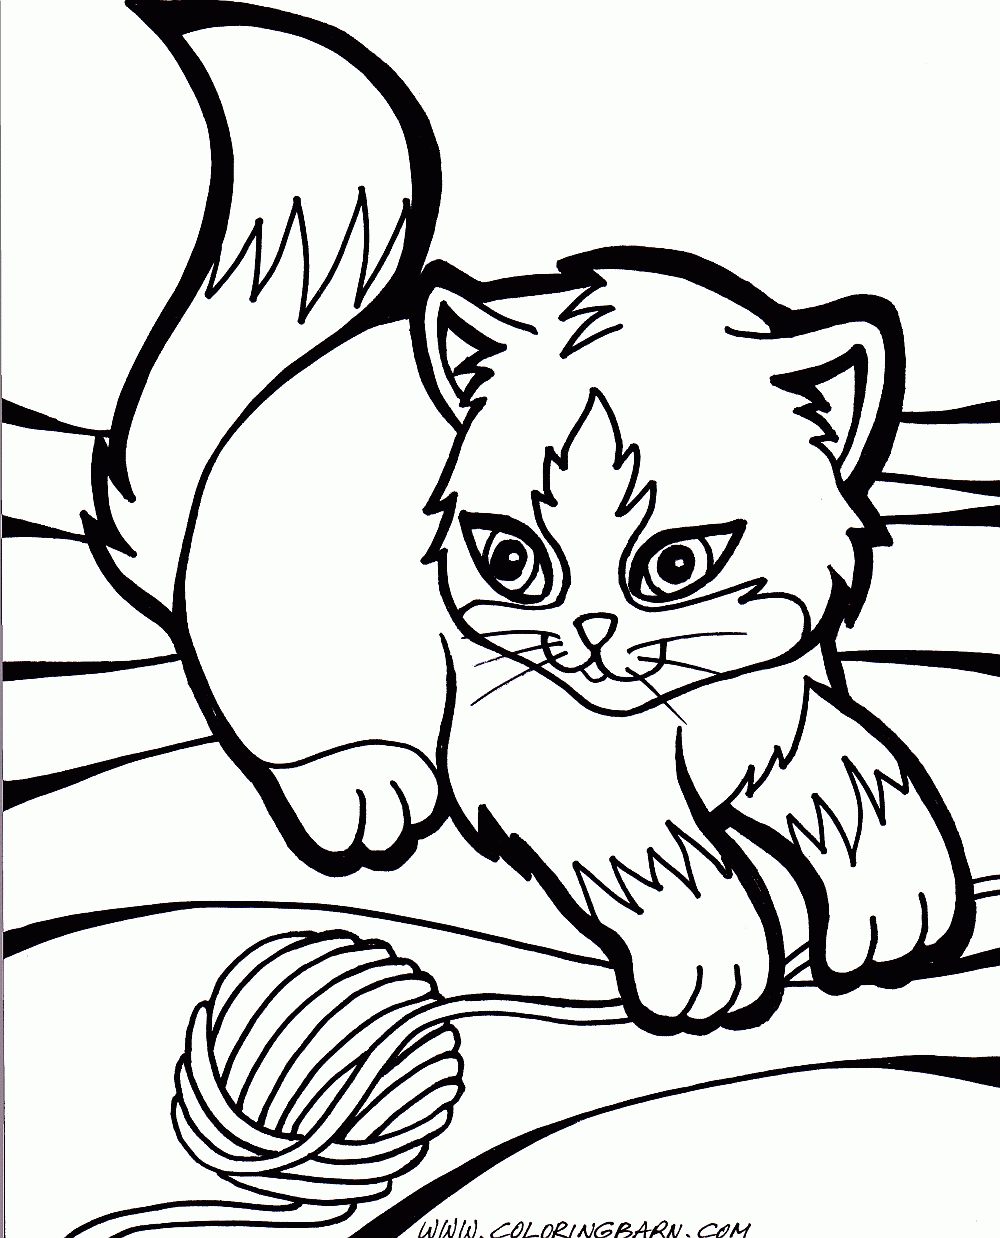 kitten-coloring-page-0030-q1